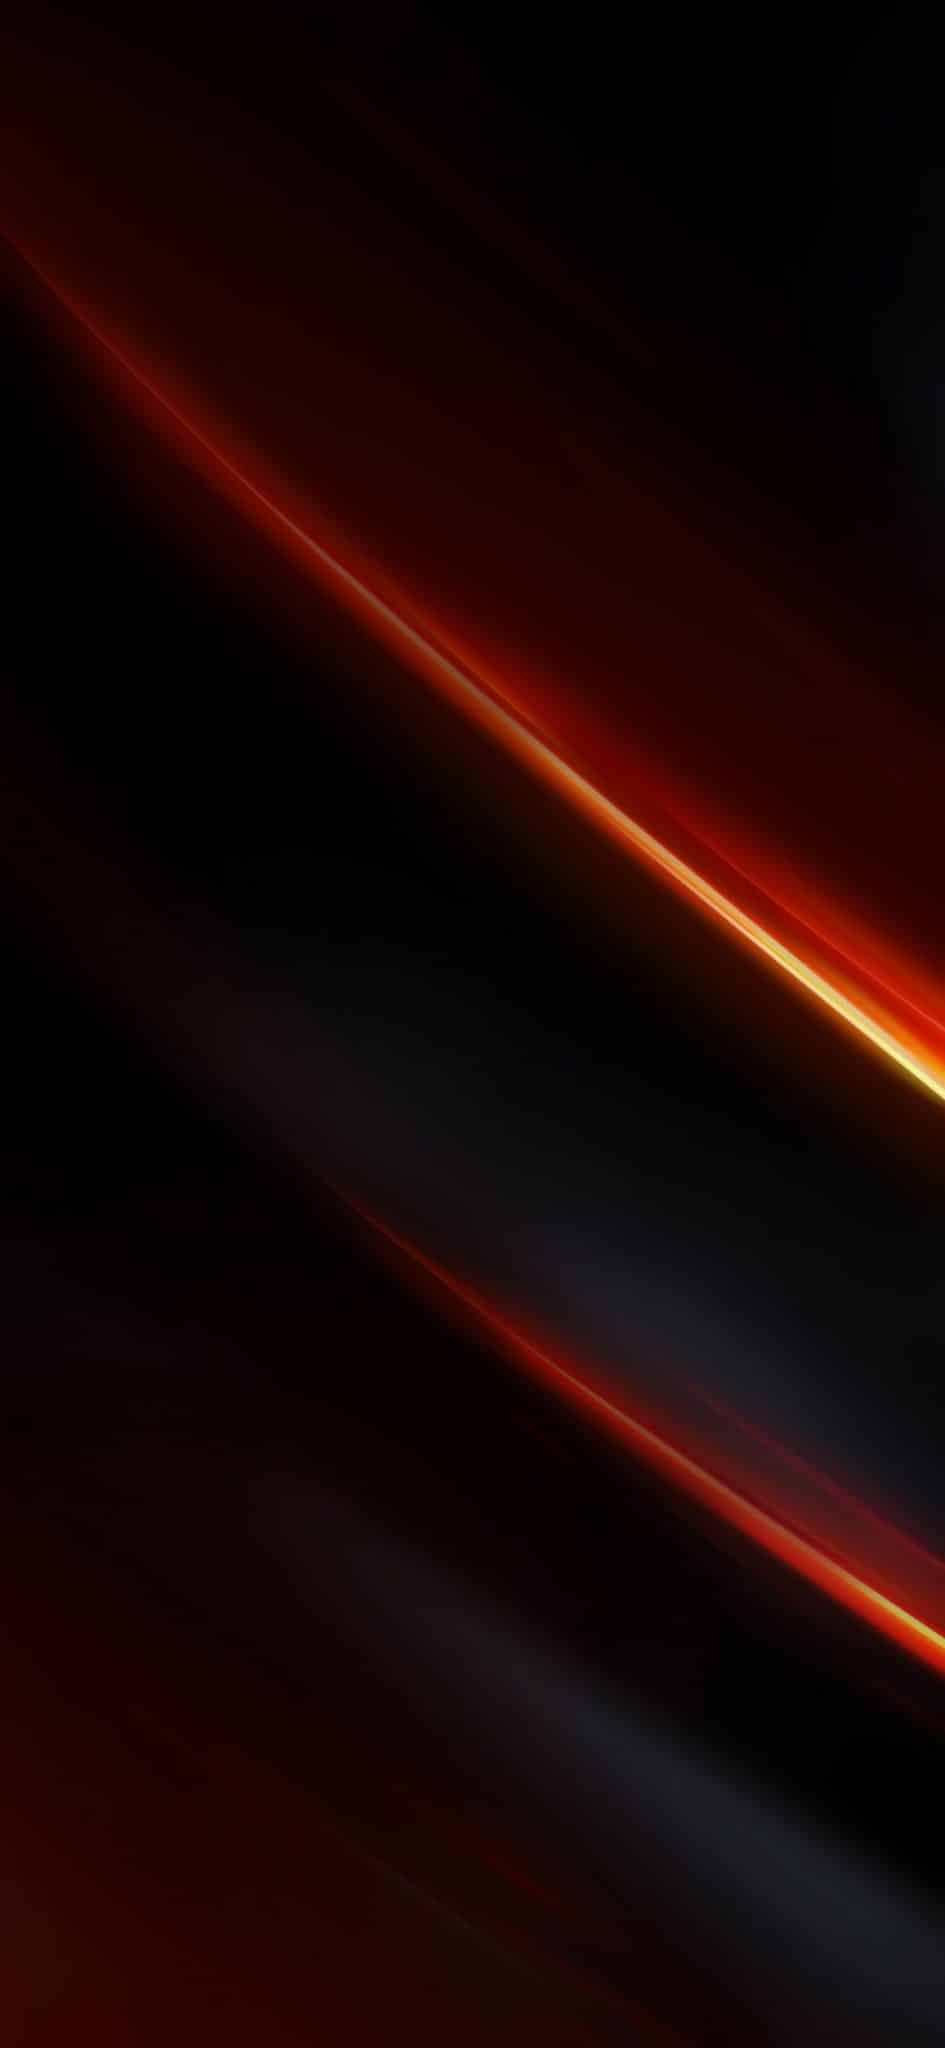 OnePlus 7T Pro McLaren Edition Wallpapers (HD+ Resolution)